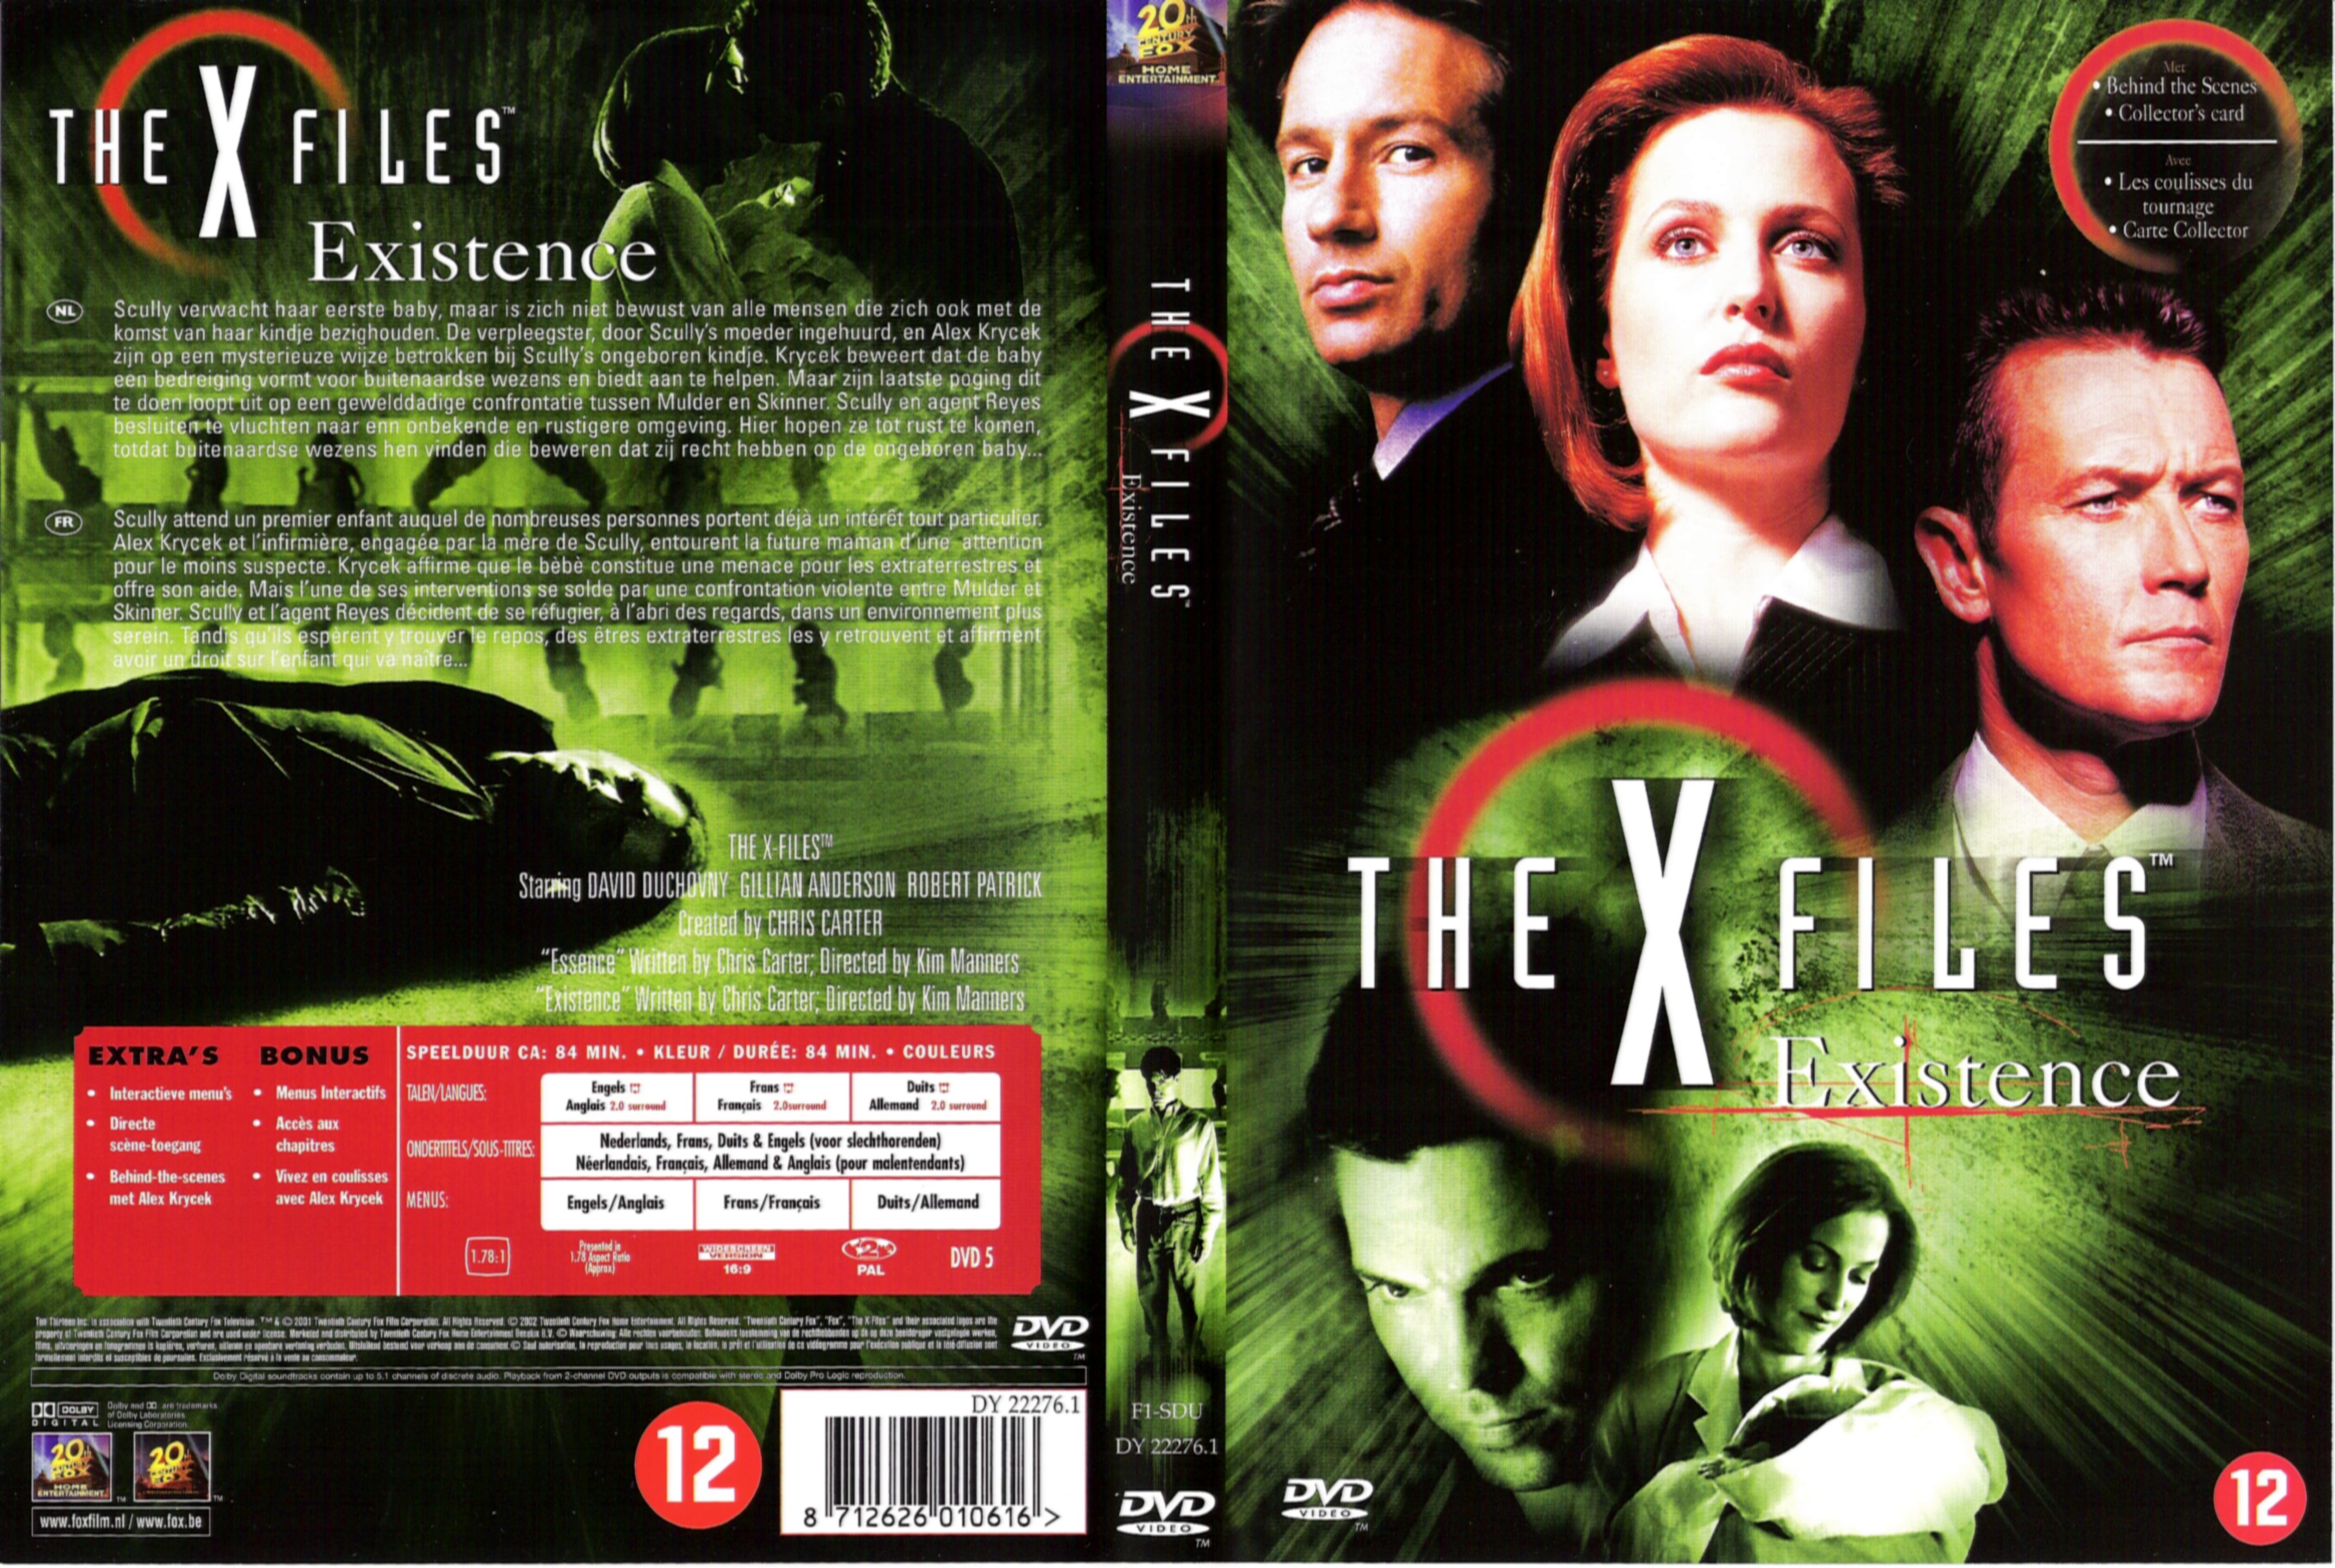 Jaquette DVD X files existence